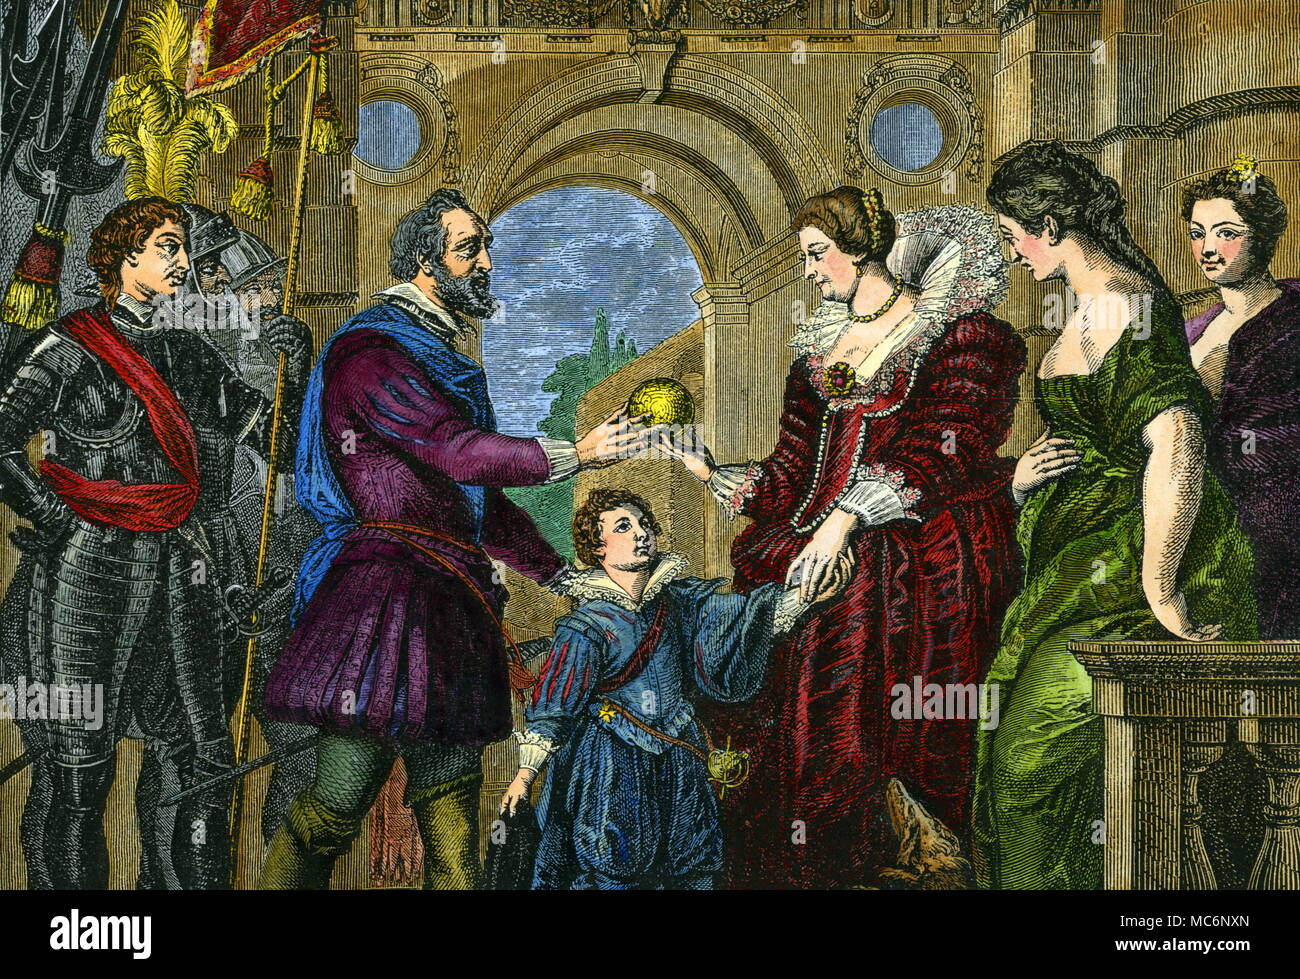 Henri IV of France confiding the government of France to his wife, Marie de Medicis. As a child, Henri had met Nostradamus: he was the subject of a number of the Seer's prophetic quatrains. This engraving is after a painting by Rubens, in the Louvre. Stock Photo